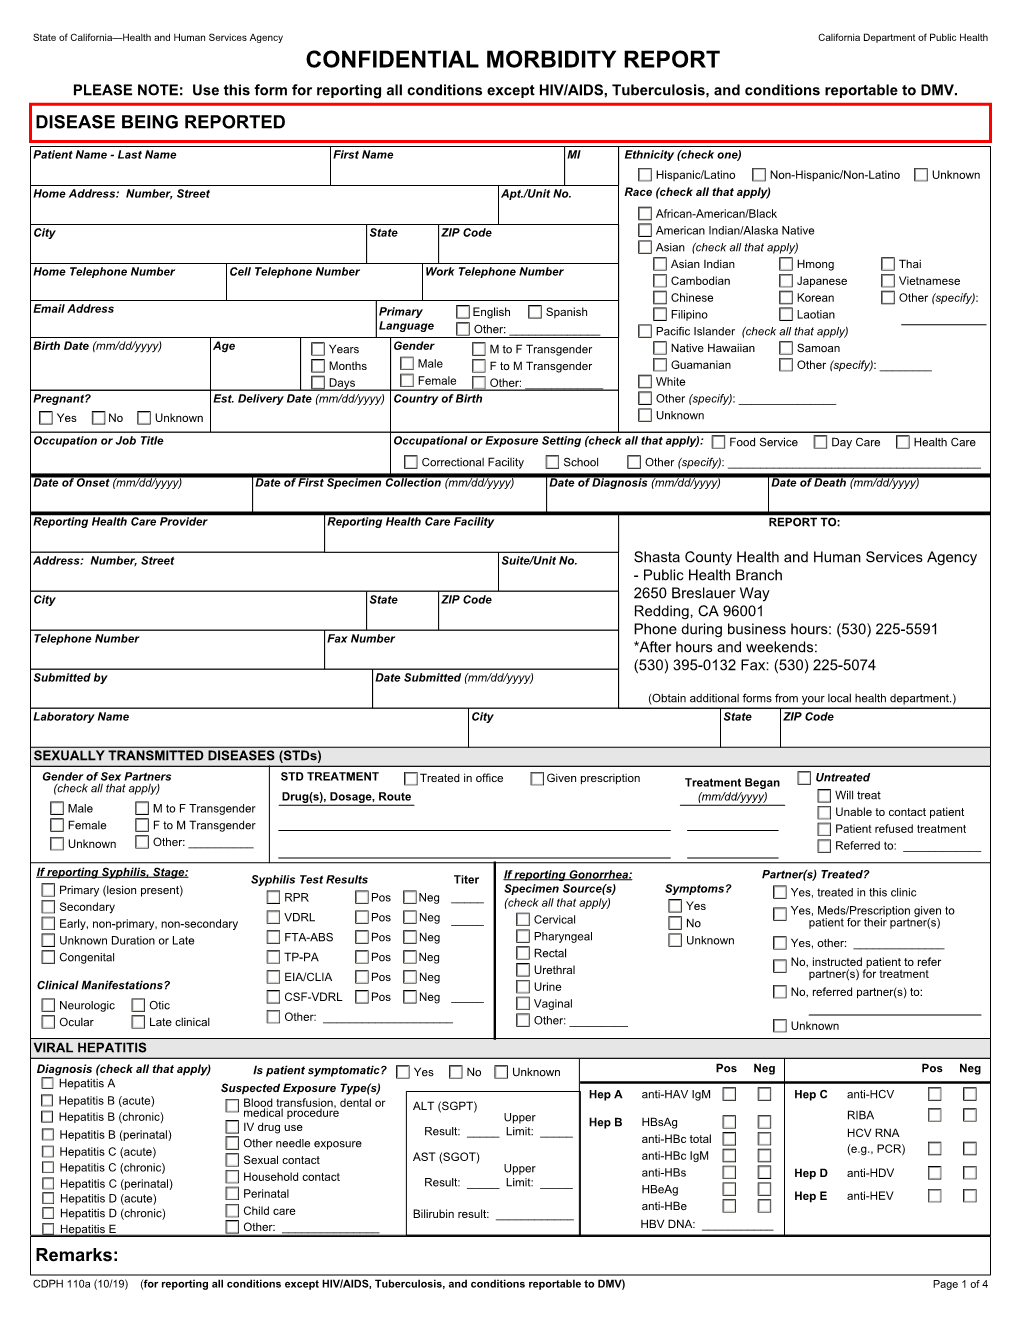 CONFIDENTIAL MORBIDITY REPORT PLEASE NOTE: Use This Form for Reporting All Conditions Except HIV/AIDS, Tuberculosis, and Conditions Reportable to DMV